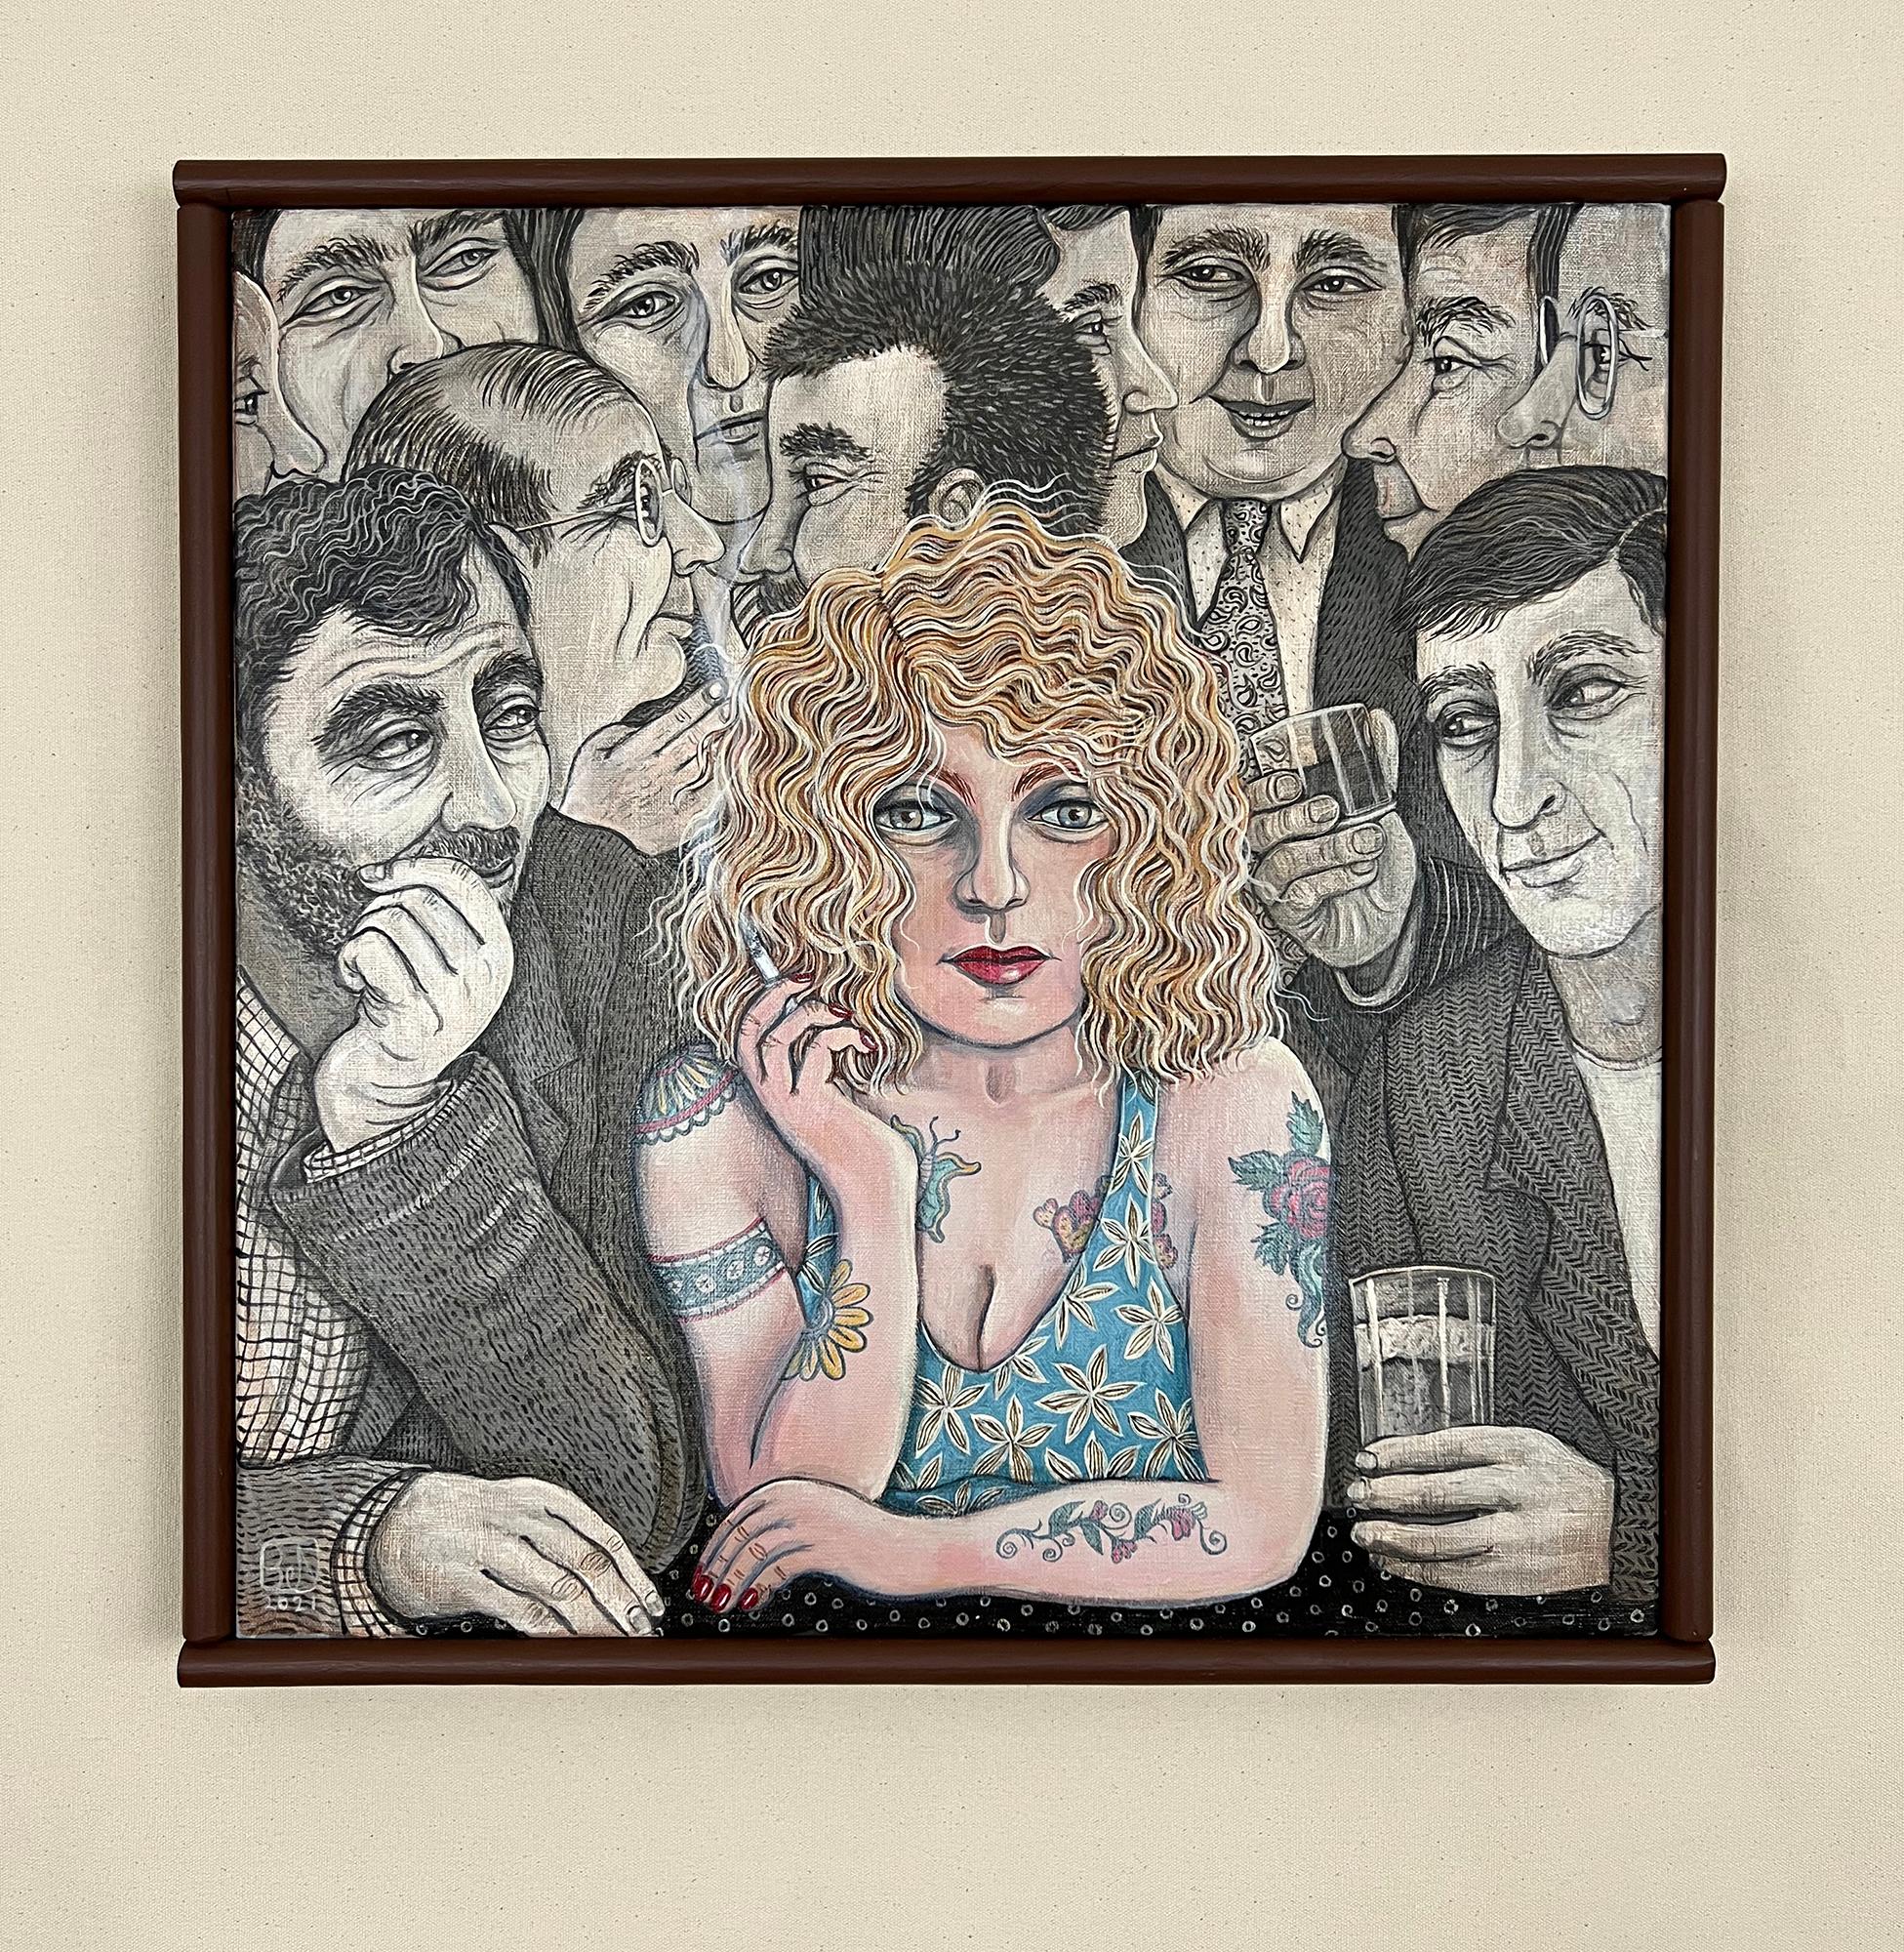 <p>Artist Comments<br>Artist Johansen Newman displays an image of a tattooed woman sitting alone in a tavern surrounded by men. 